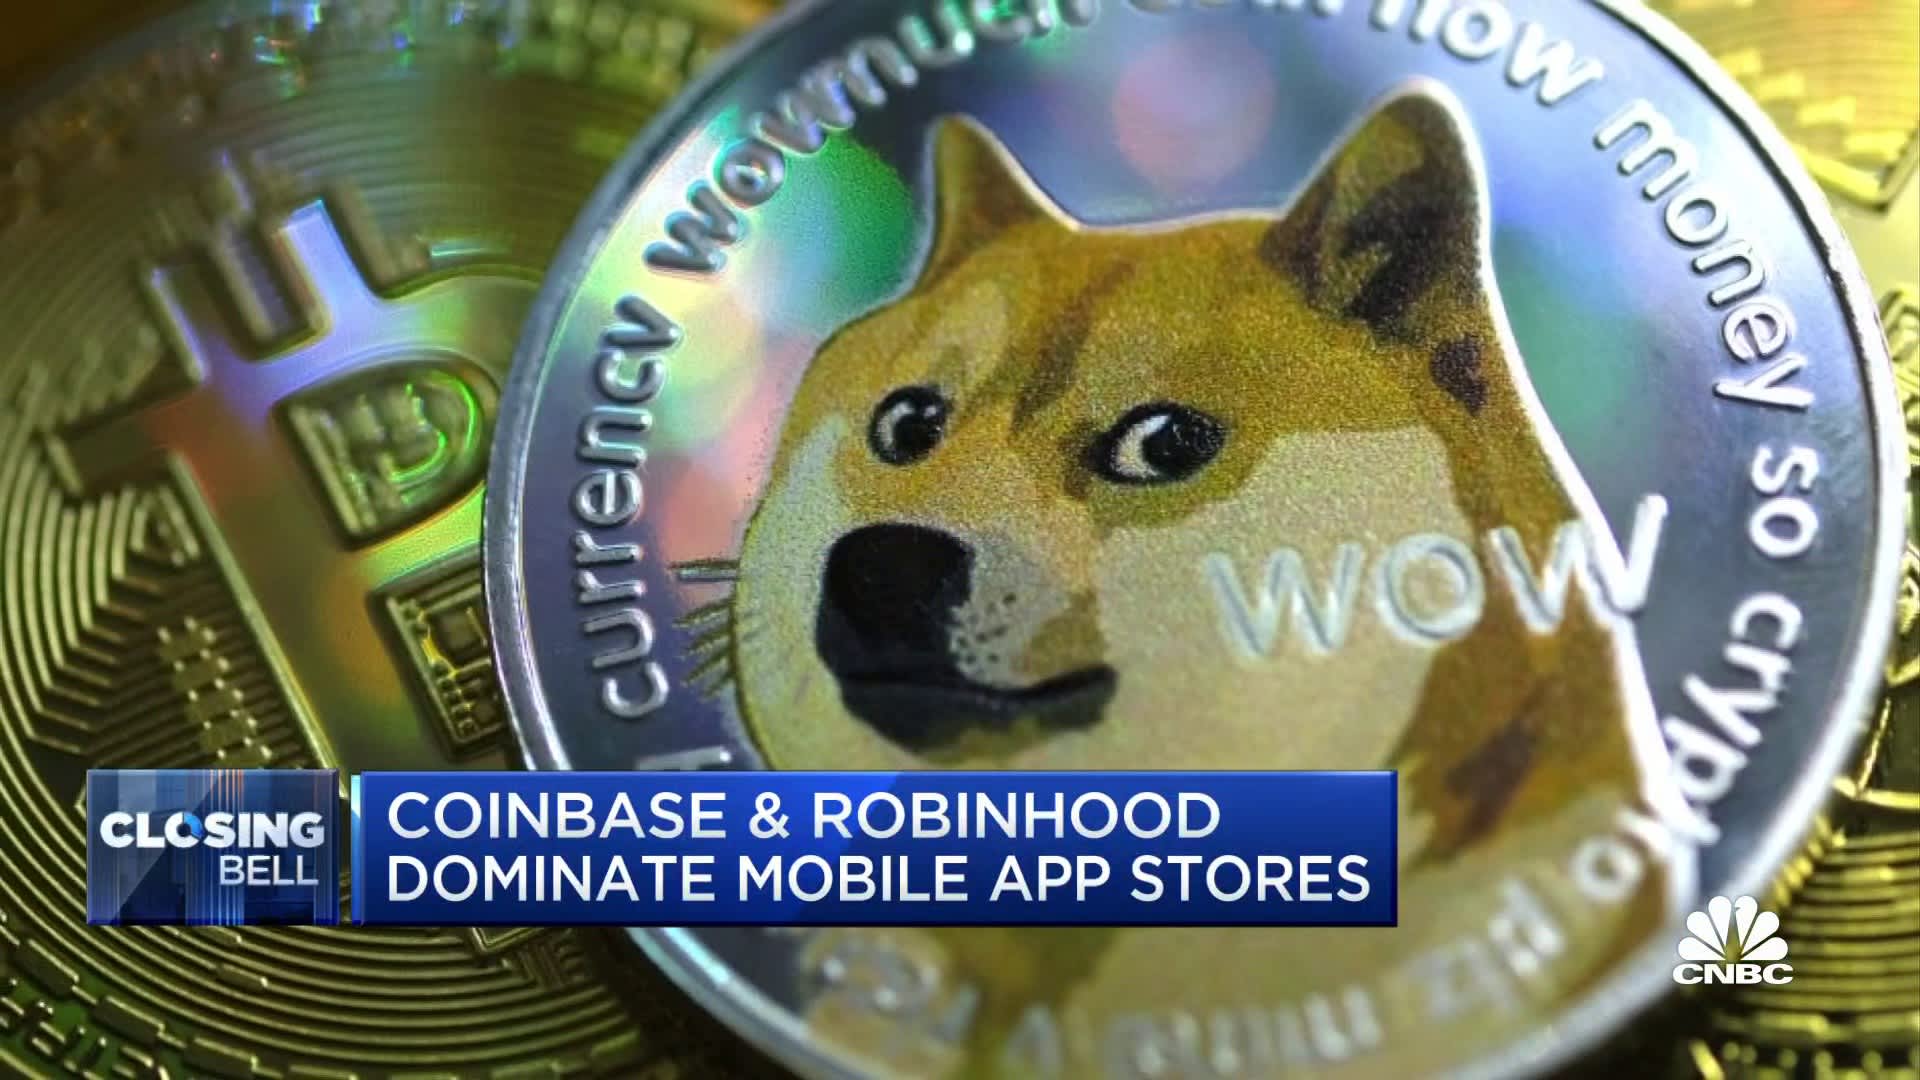 Dogecoin's popularity soars — Robinhood and Coinbase benefit